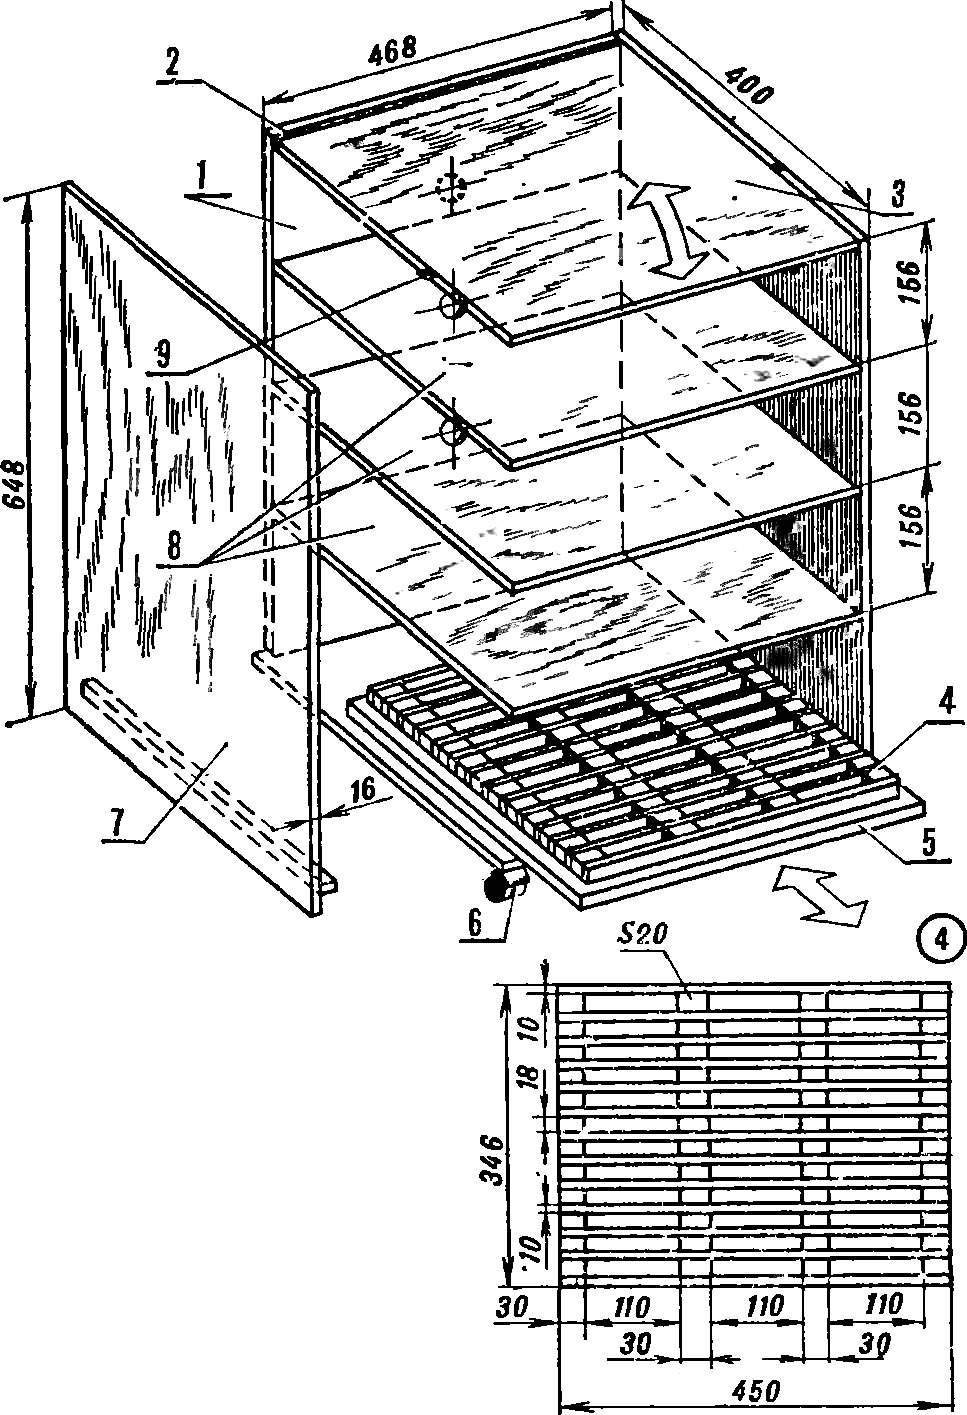 Fig. 2. Section of radio.